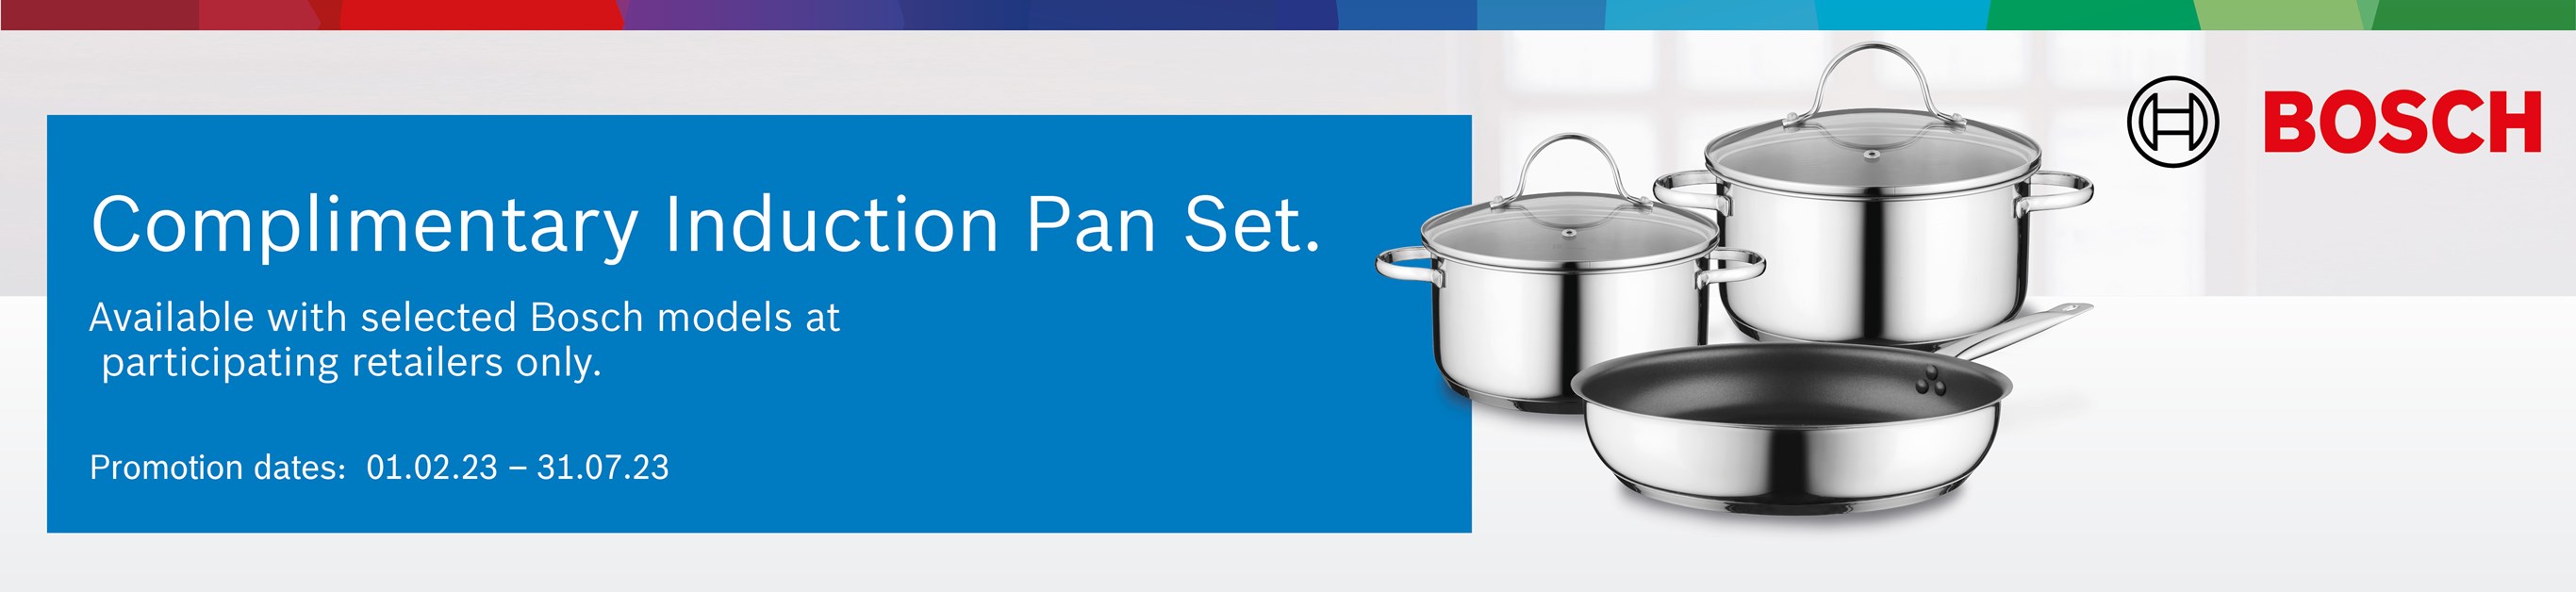 Bosch Complimentary Induction Pan Set